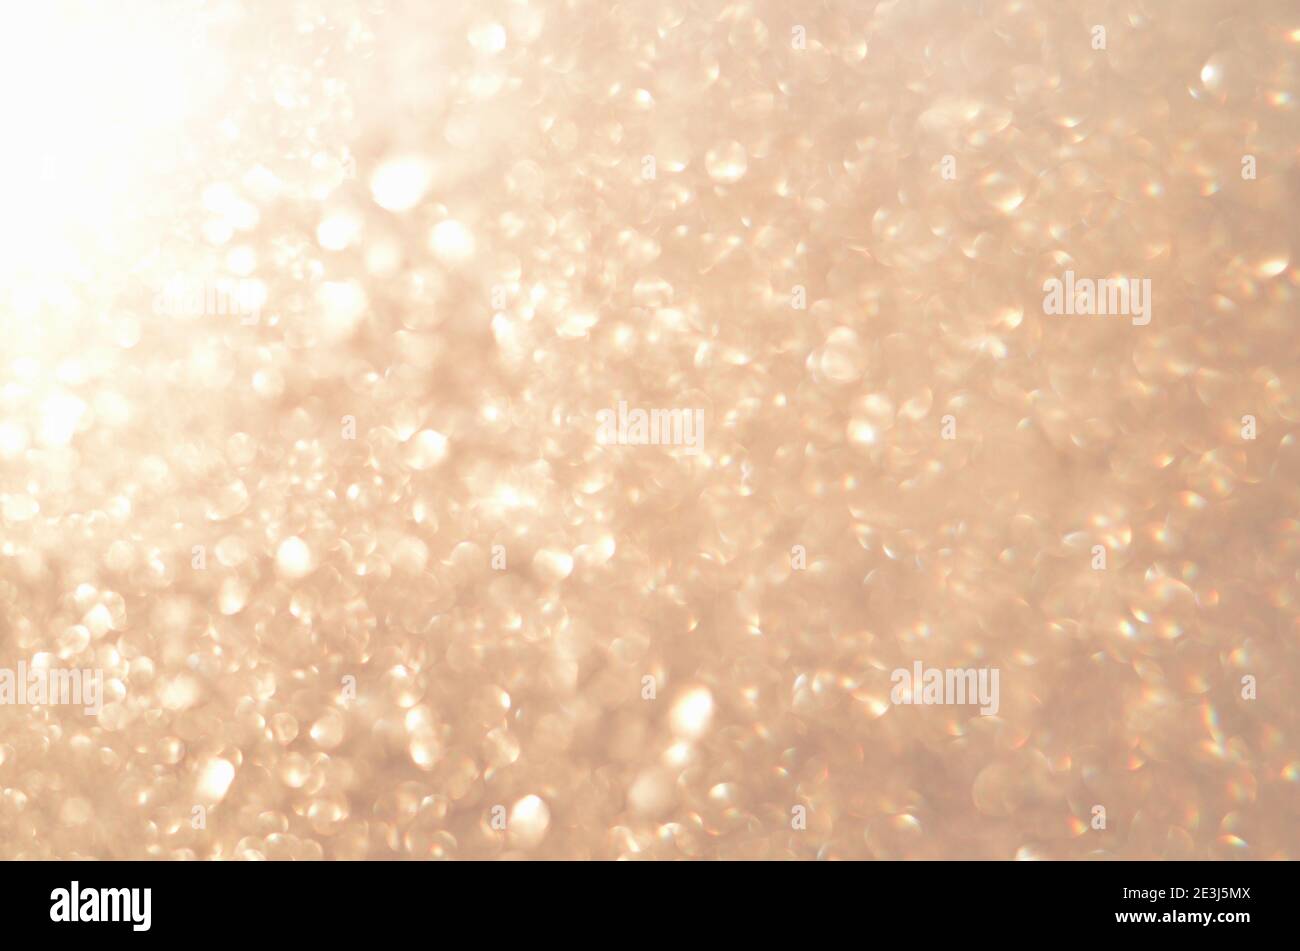 Glitter abstract background with unfocused soft golden light. Defocused image. Stock Photo